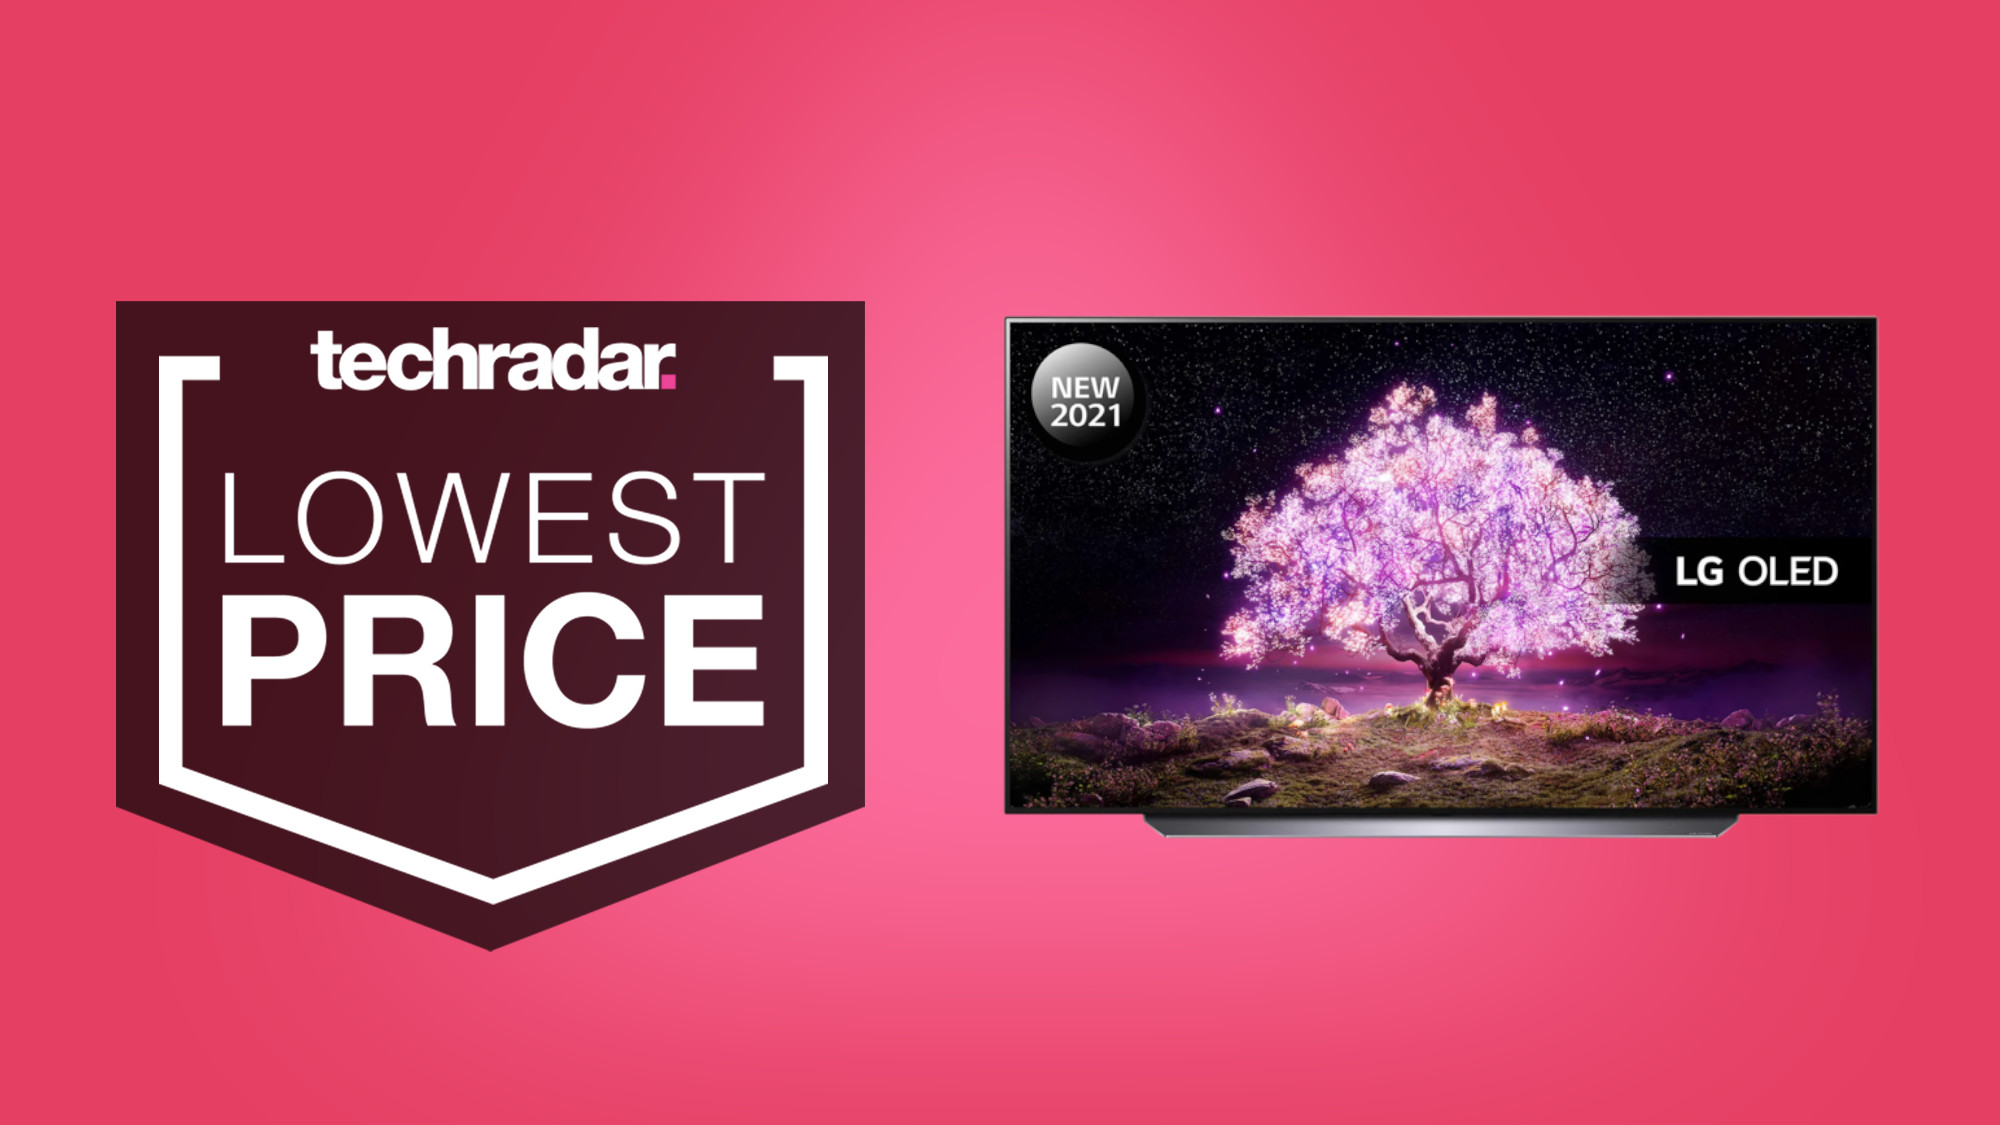 LG C1 series hits lowest price yet in Amazon's latest OLED TV deals